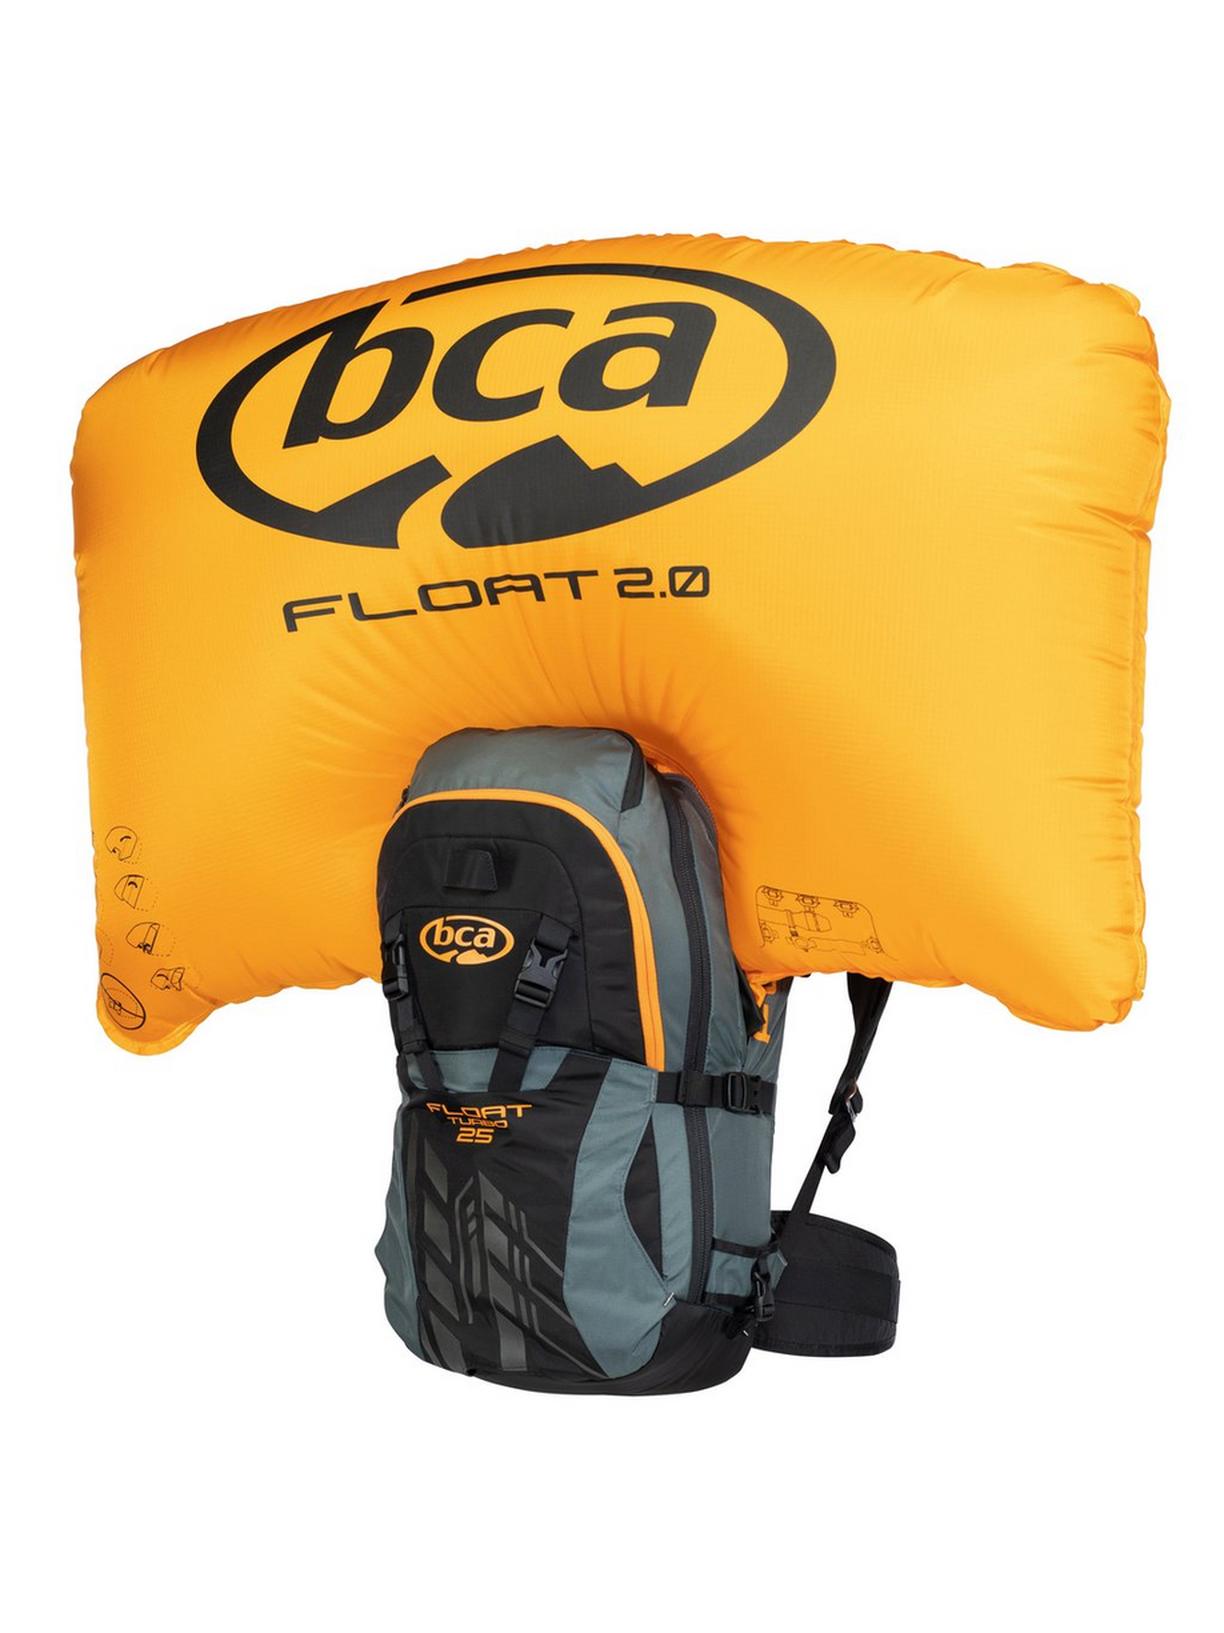 BCA Float 25 Turbo Avalanche Airbag 2.0 - Ascent Outdoors LLC